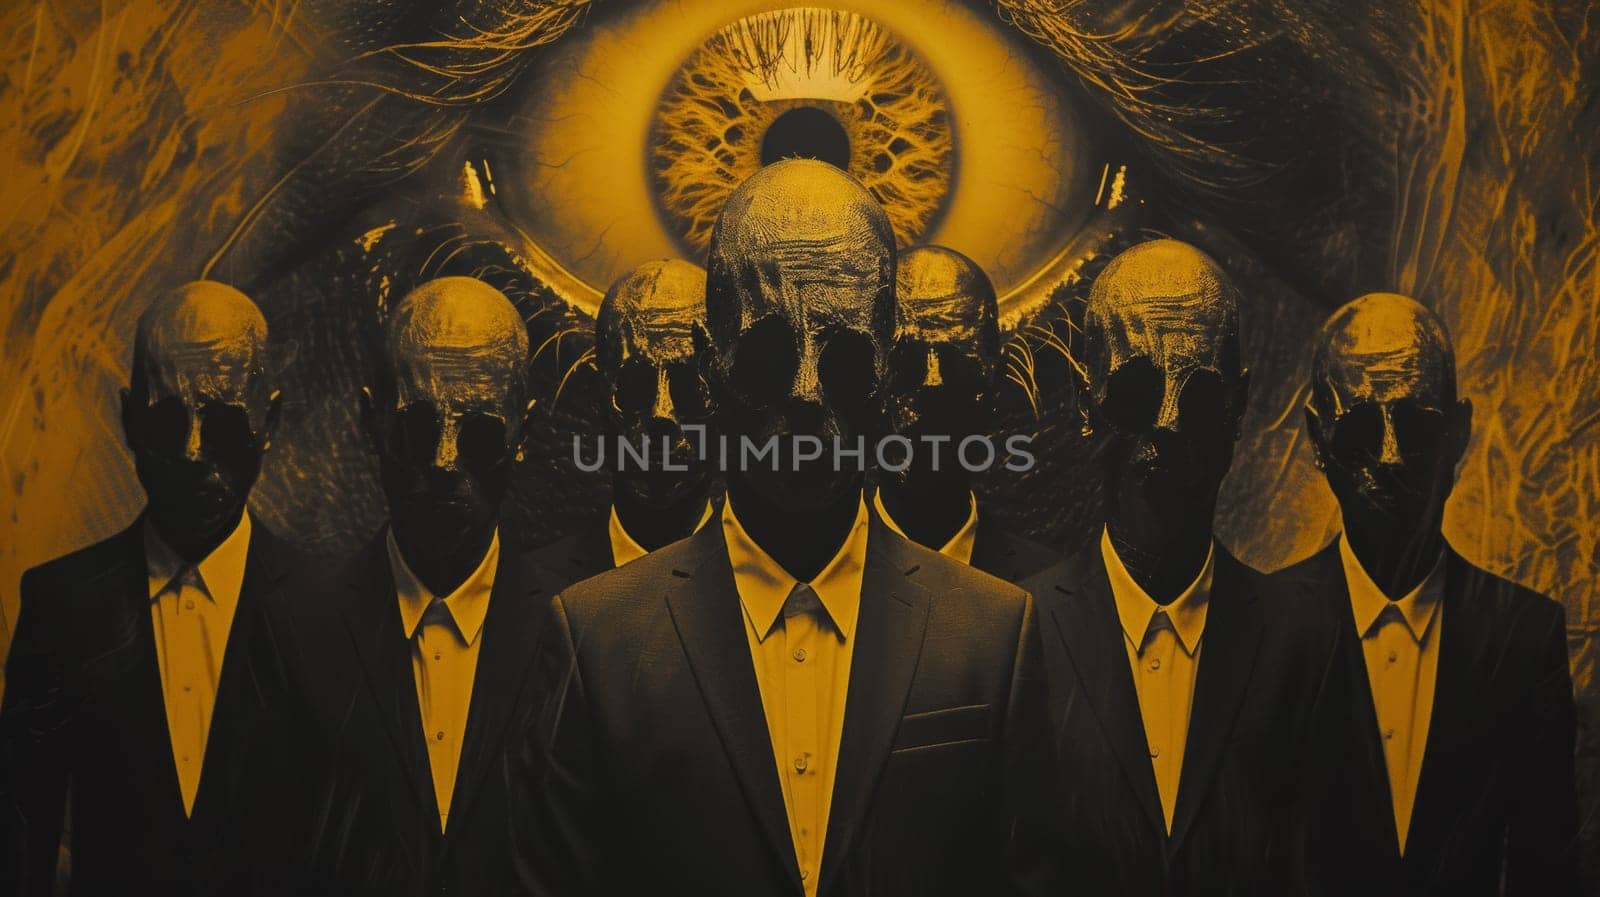 A group of men in suits with a large eye behind them